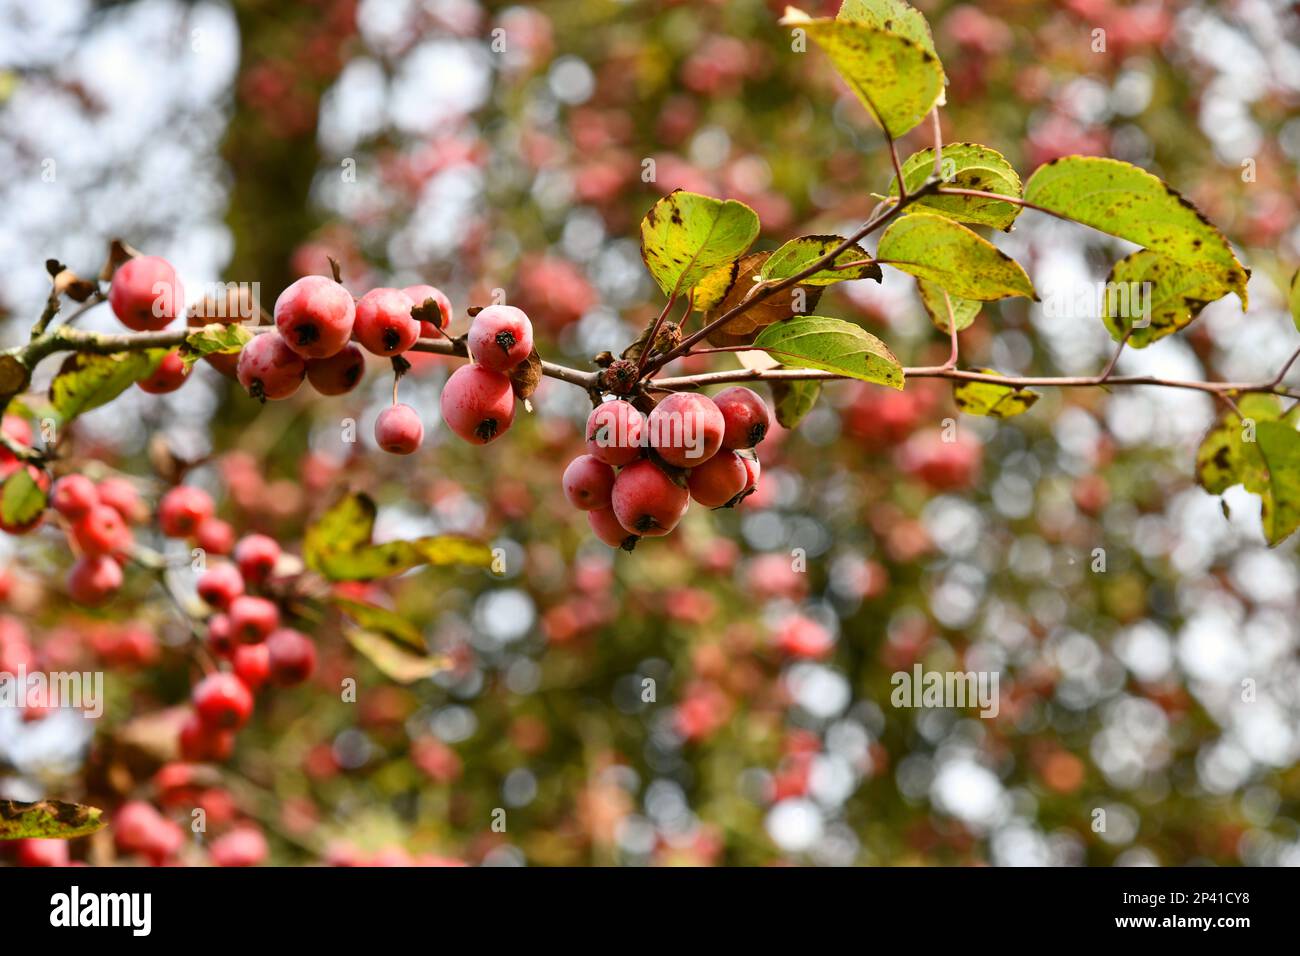 Cherry apple tree with red fruits- Malus baccata Stock Photo